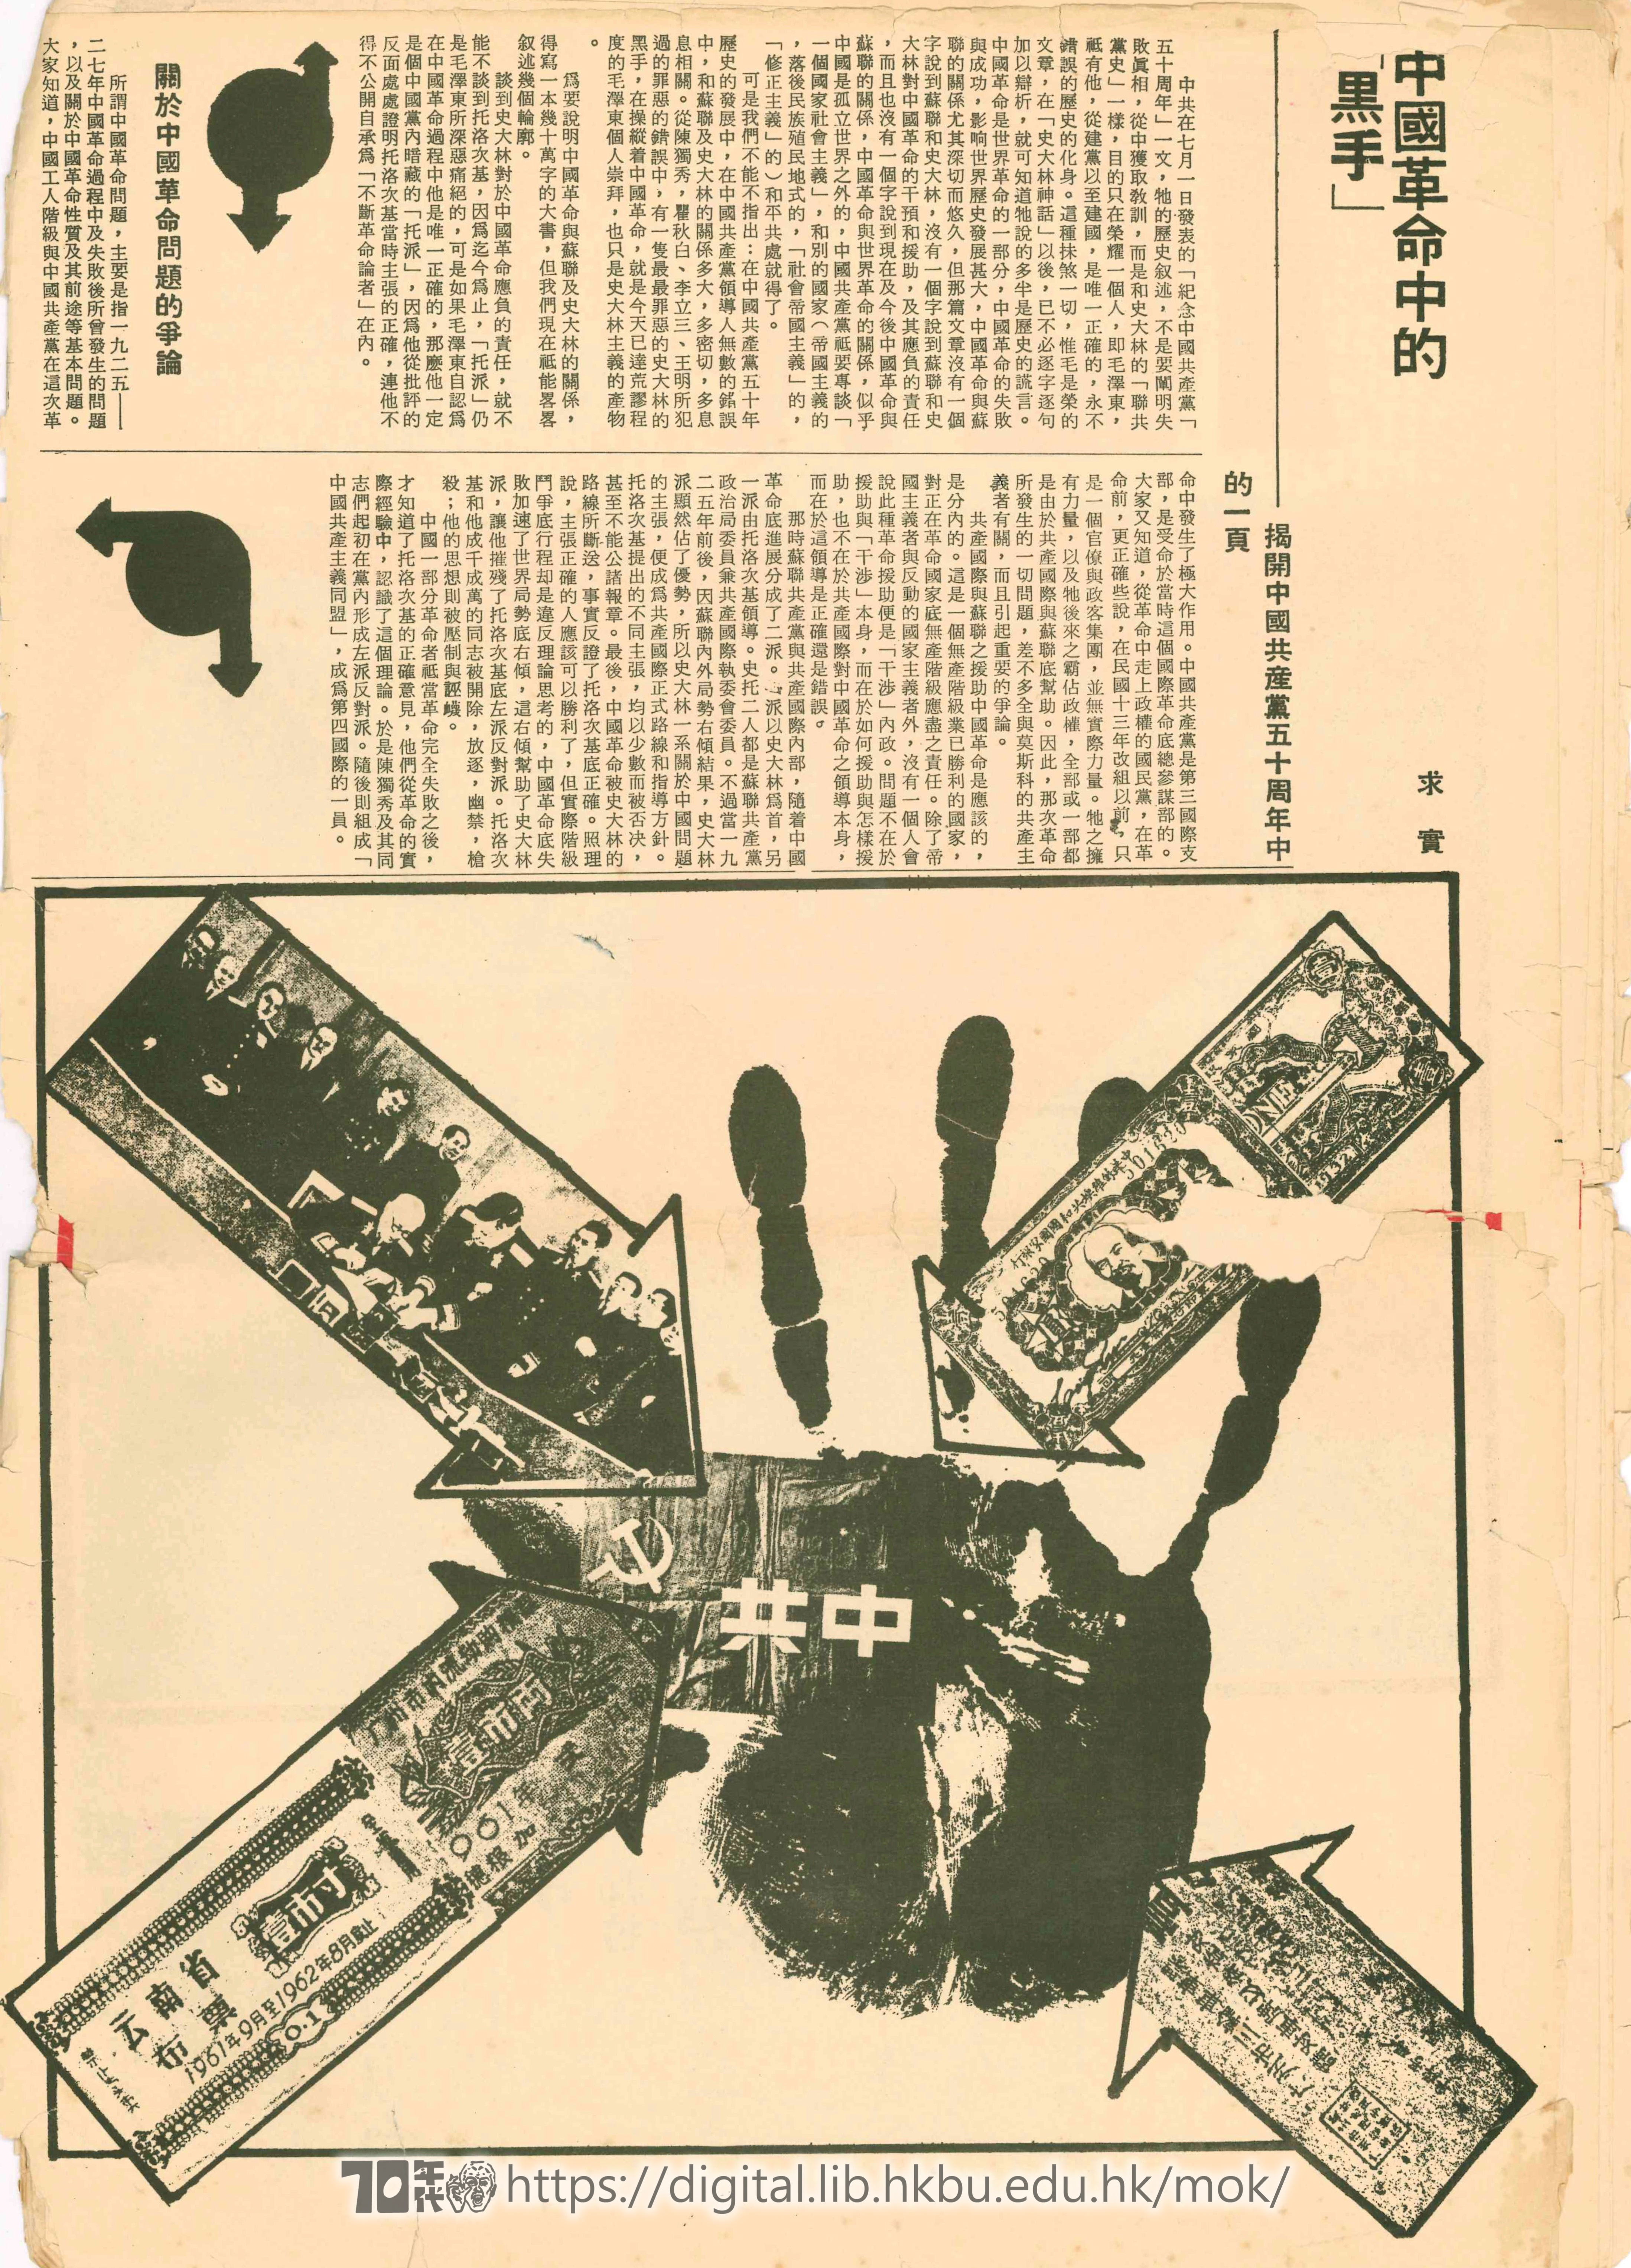  24 "Black hand" of the Chinese revolution 求實 